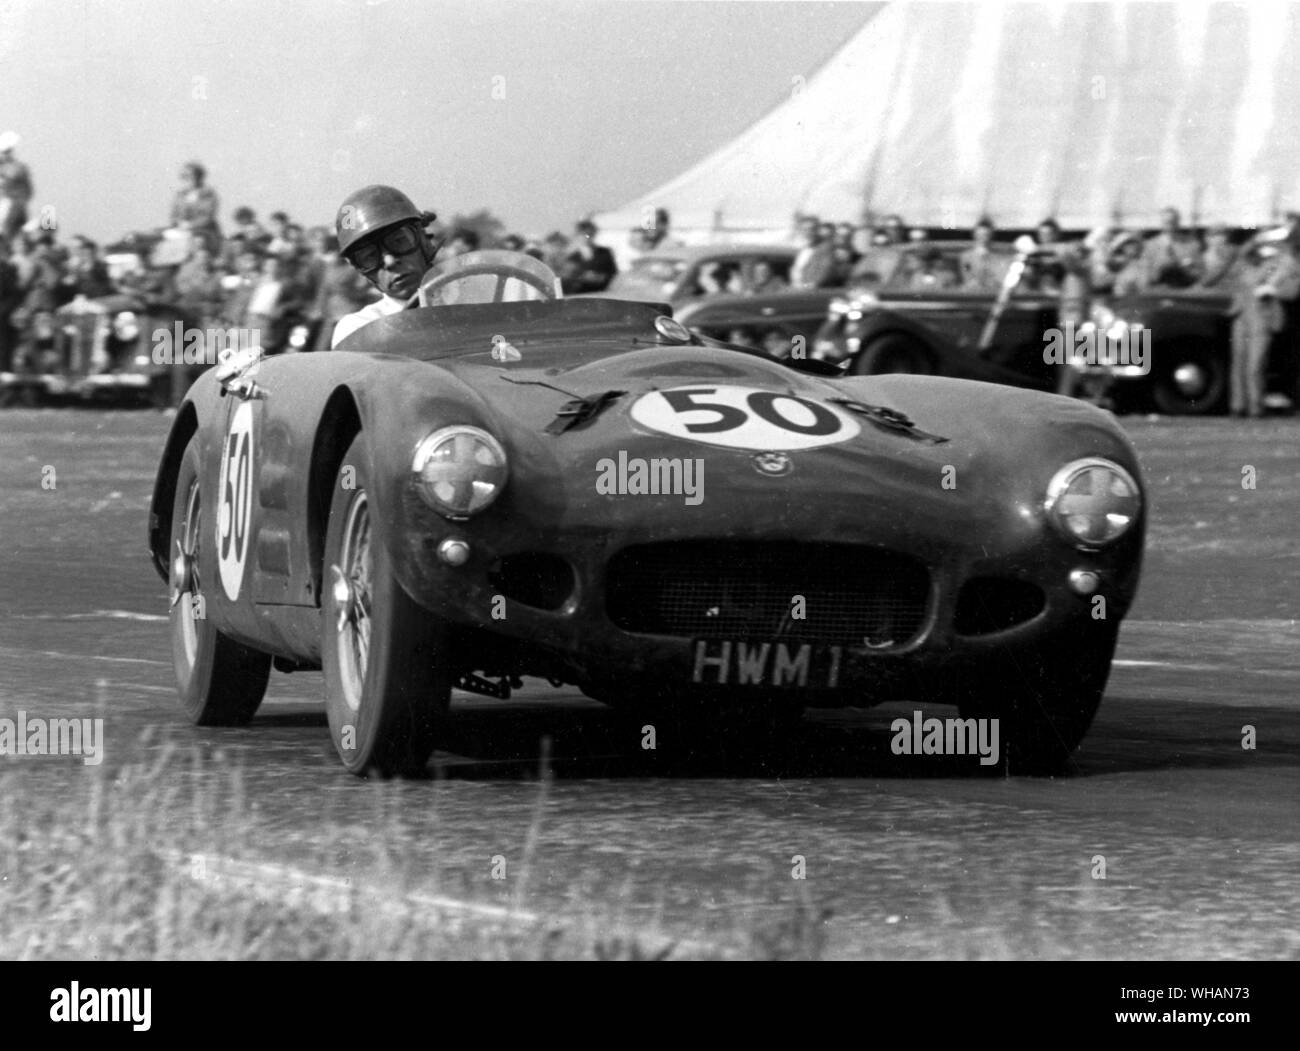 George Abecassis takes the Jaguar engined H W M  sports car through the Esses Stock Photo